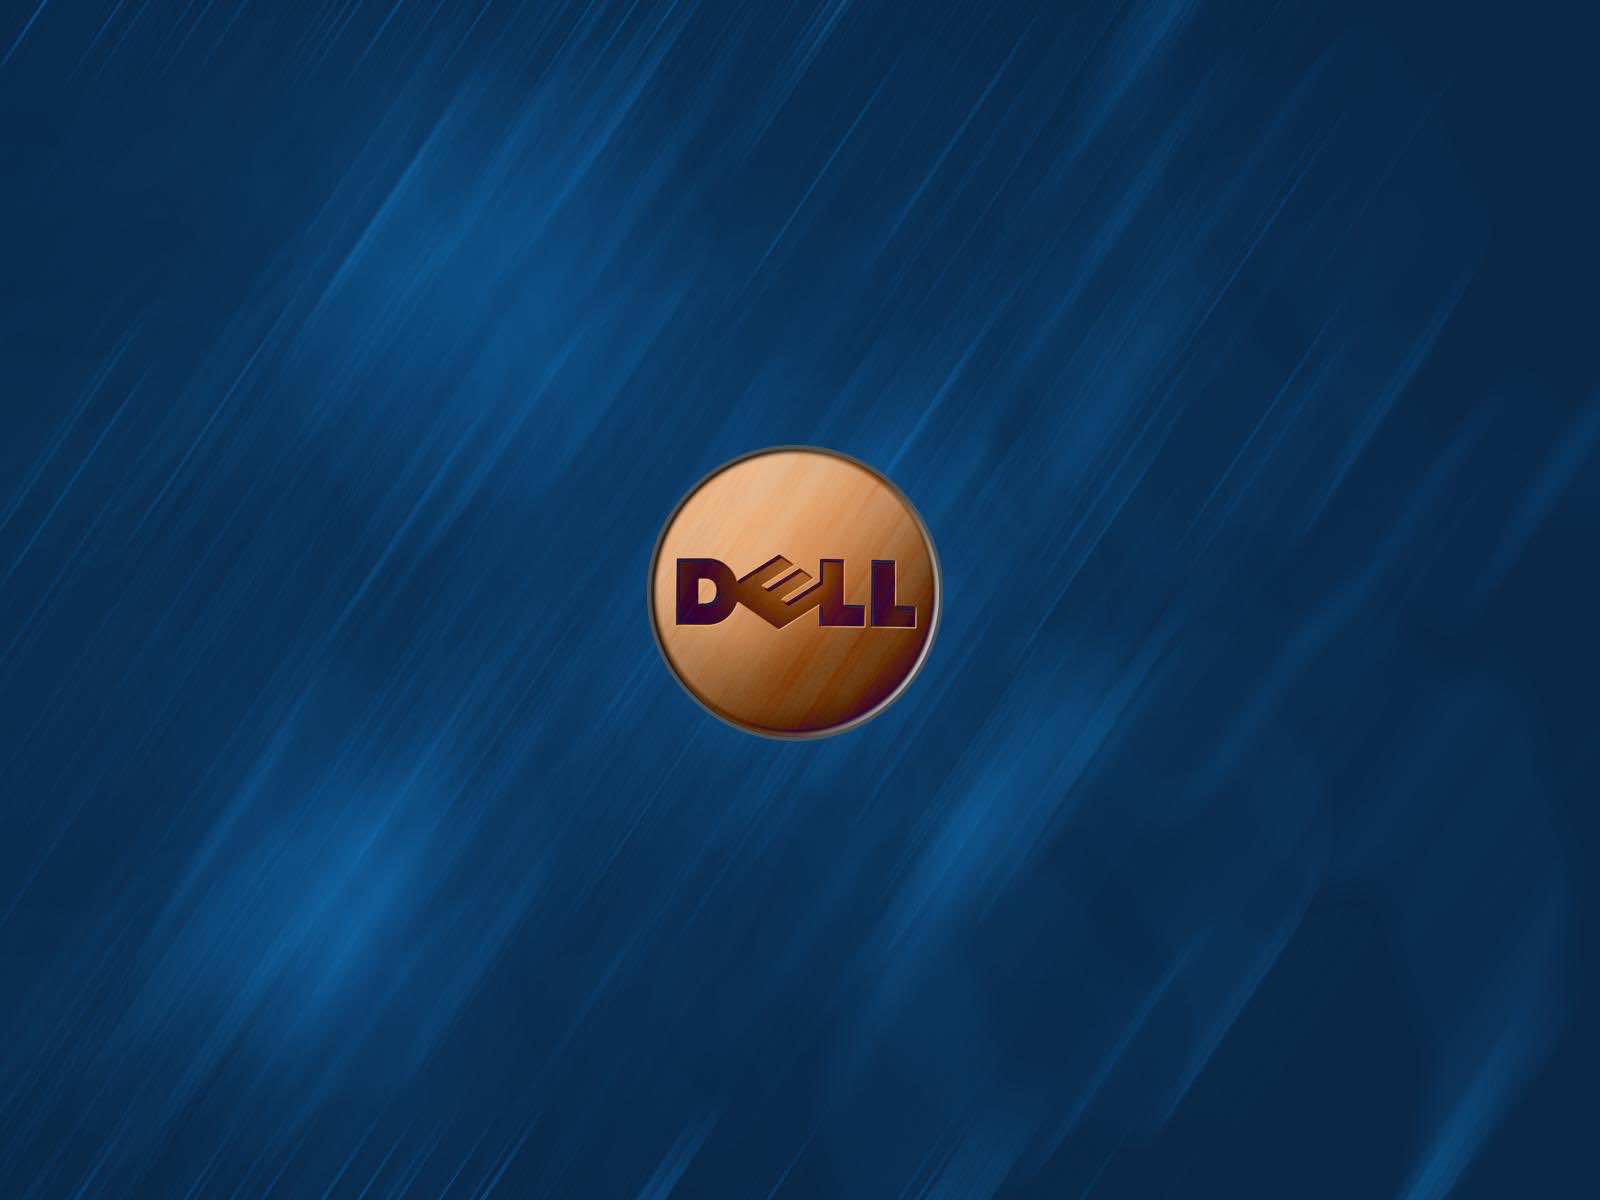 Backgrounds & Dell Wallpaper Images